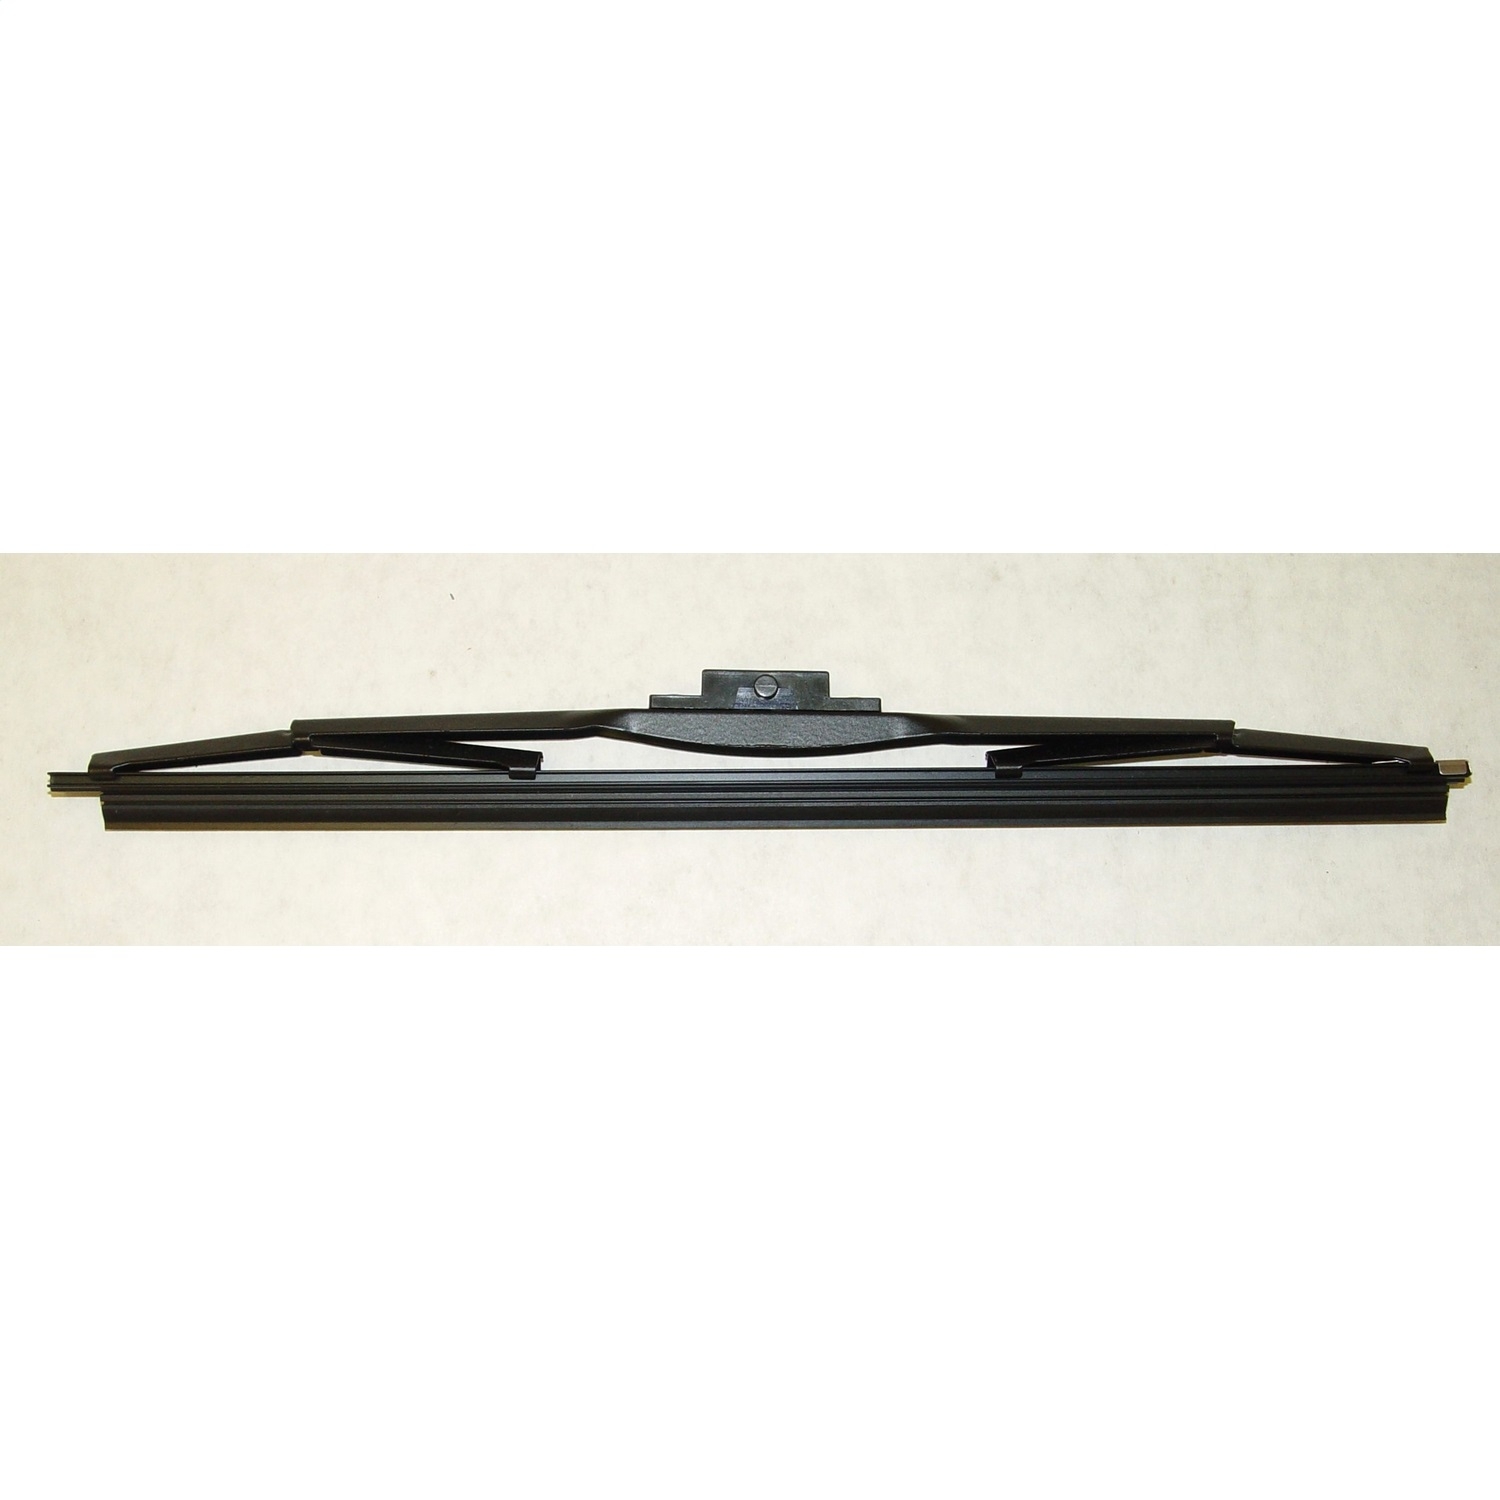 Omix This 11 inch windshield wiper blade from Omix fits 68-86 Jeep CJ  models. | Best Prices & Reviews at Morris 4x4